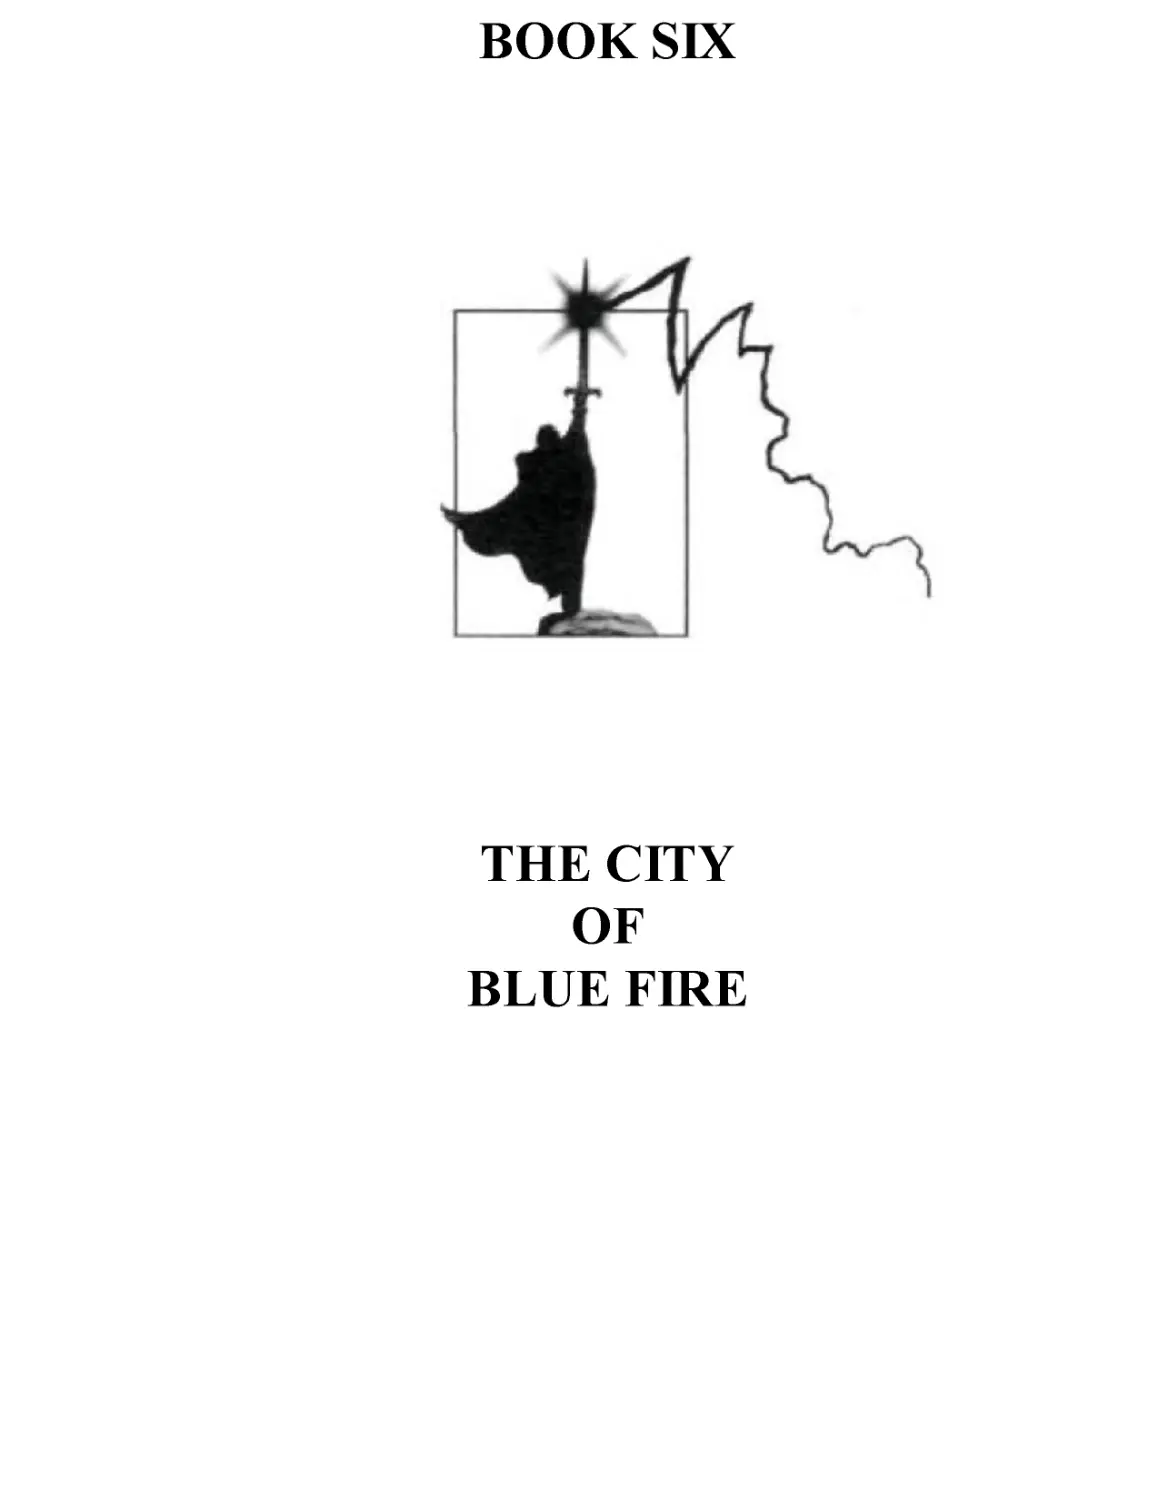 BOOK SIX: THE CITY OF BLUE FIRE